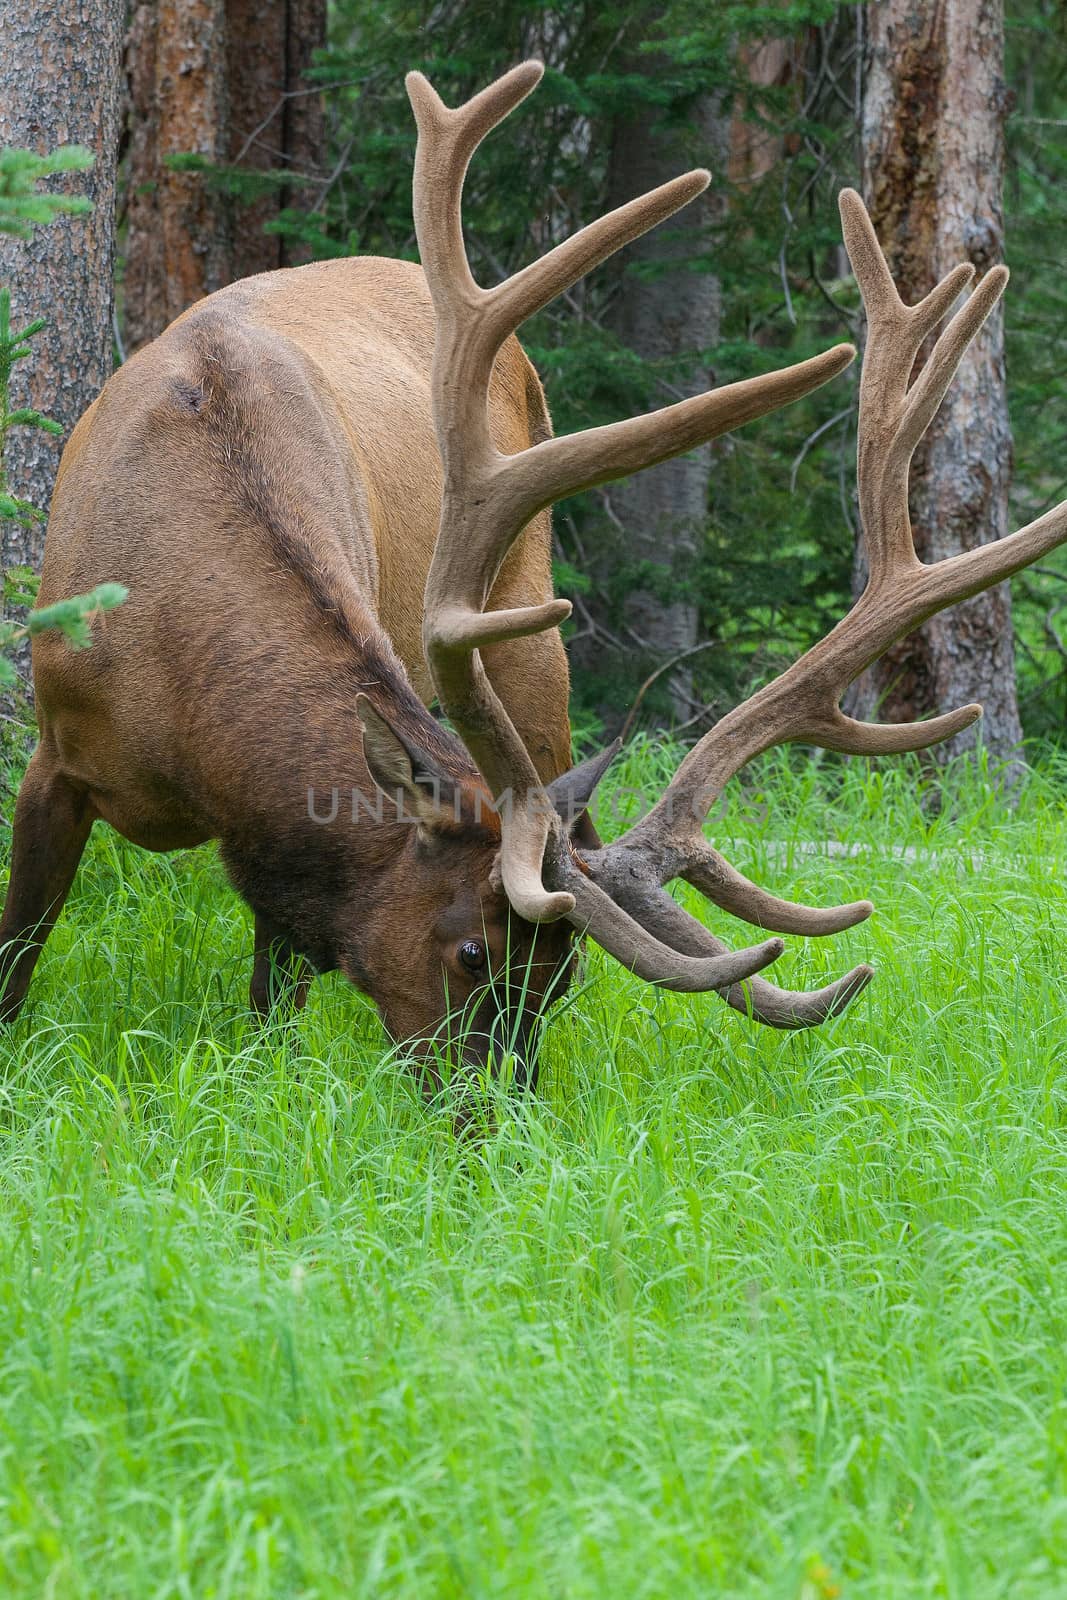 Large bull elk standing in a meadow in the woods in Yellowstone National Park